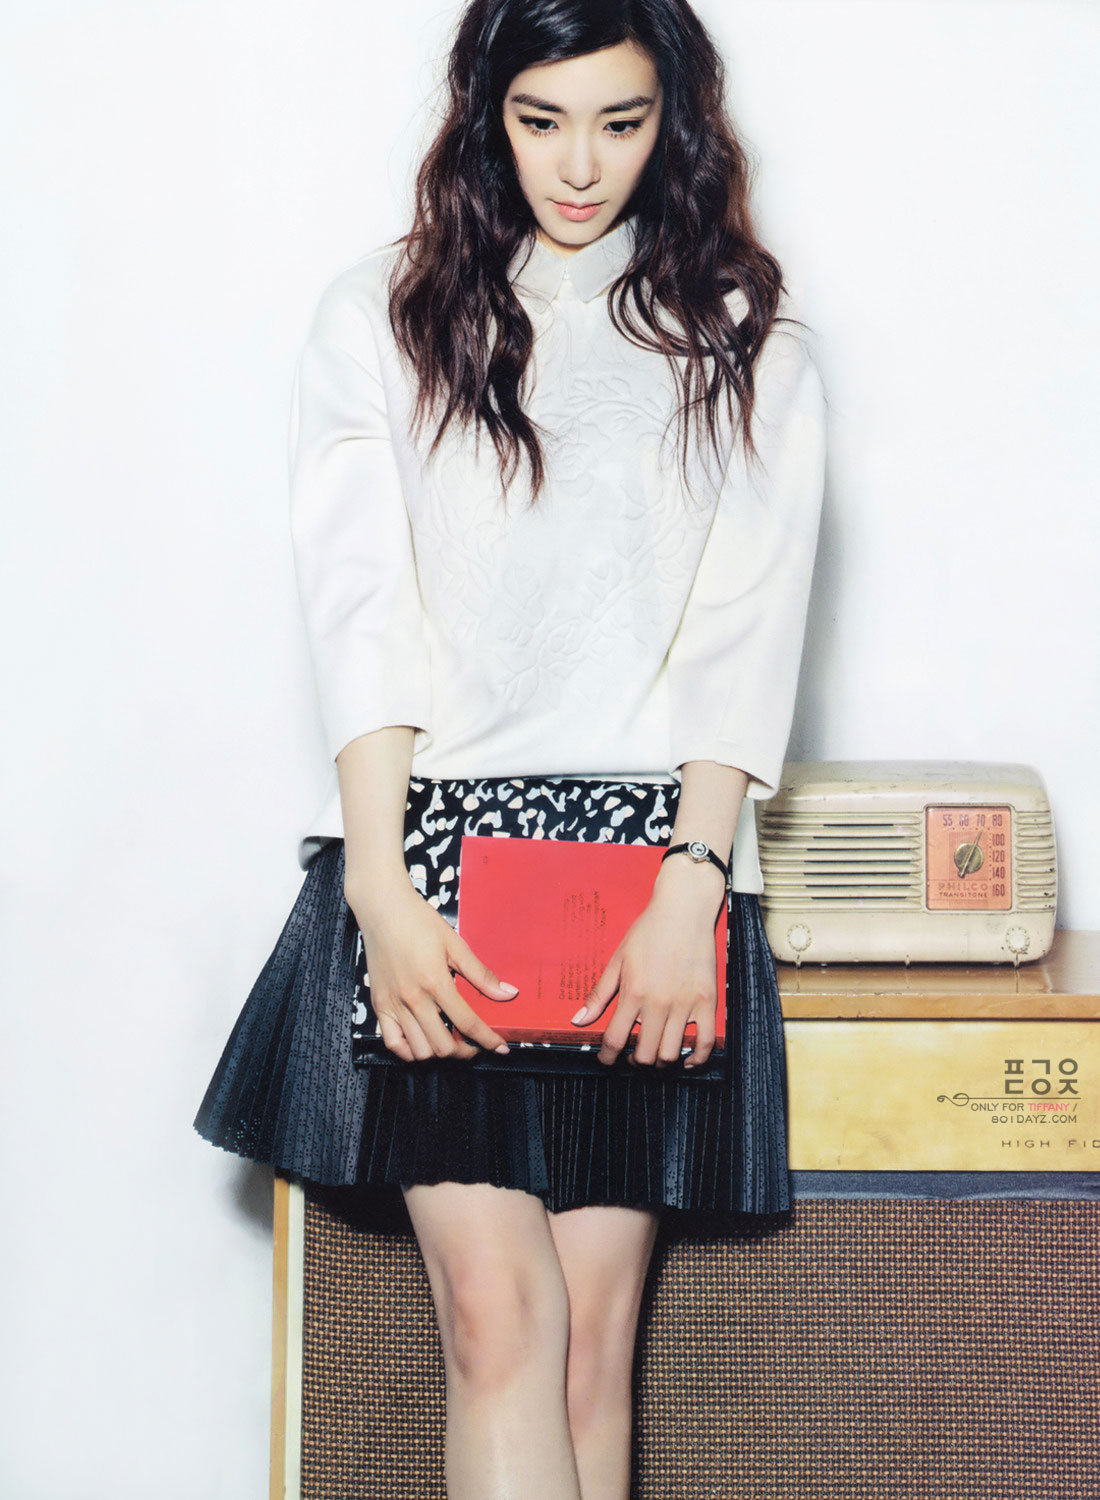 Vogue Girl in love with Tiffany